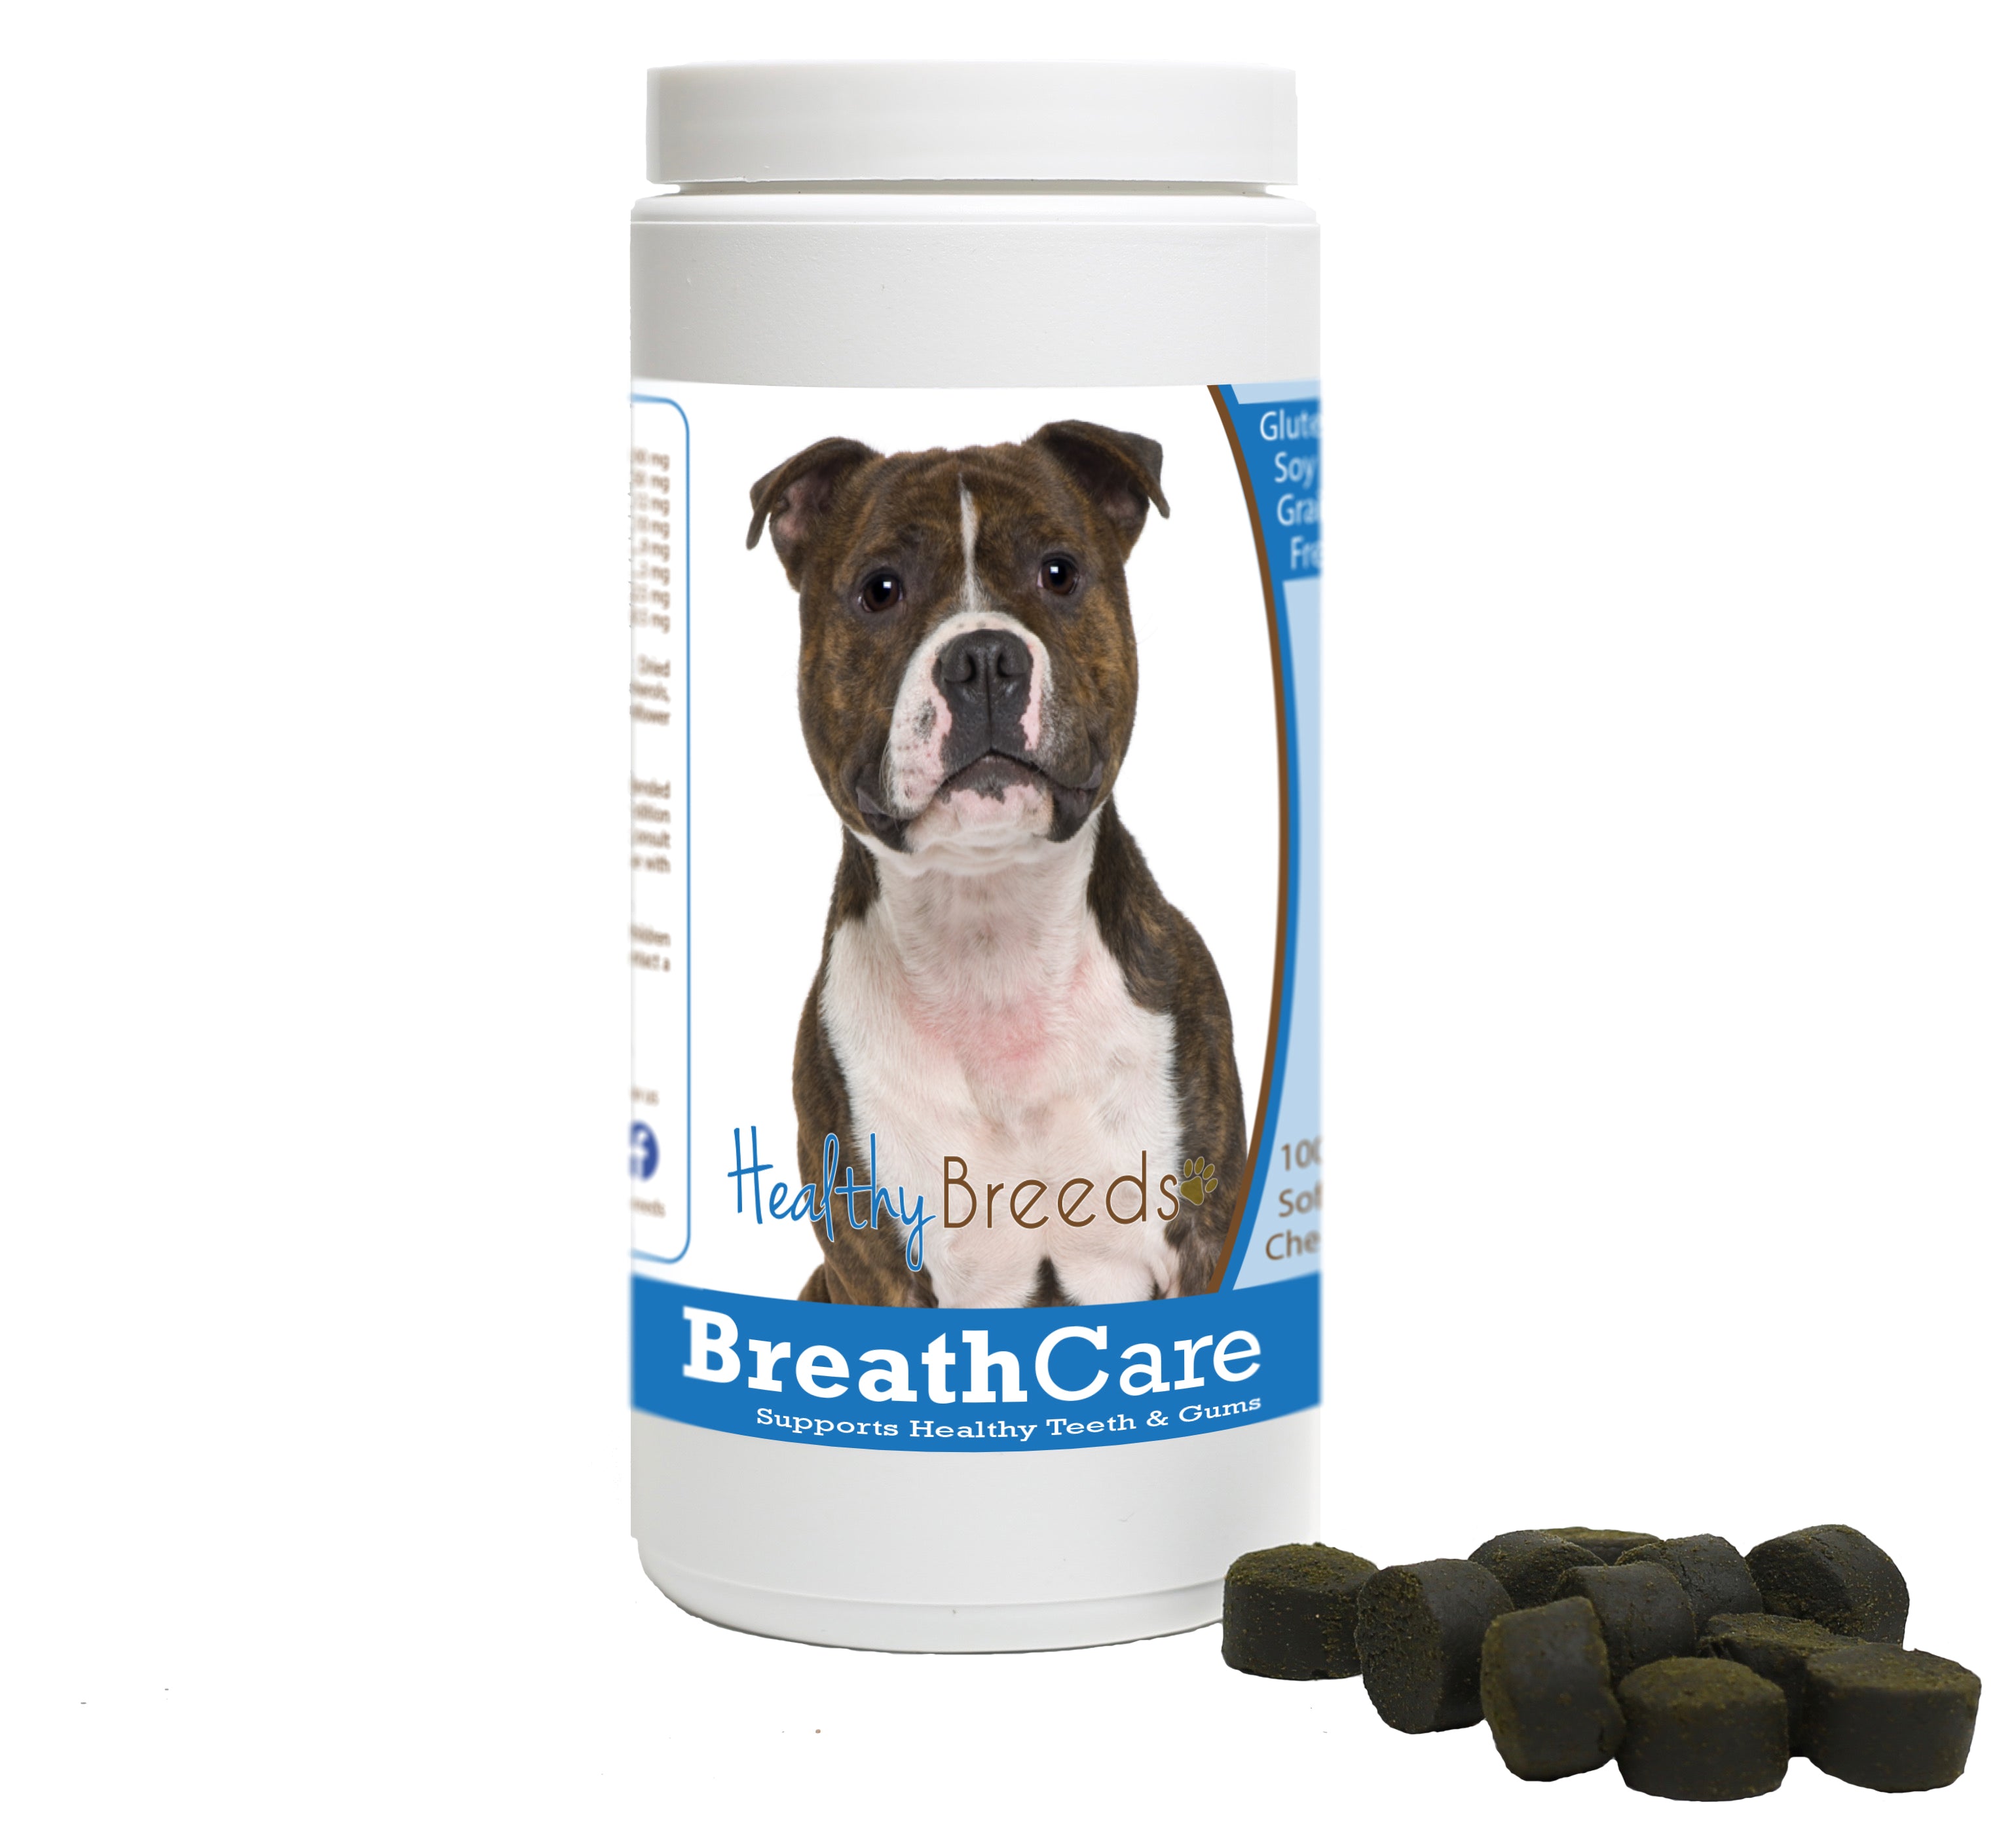 Staffordshire Bull Terrier Breath Care Soft Chews for Dogs 60 Count